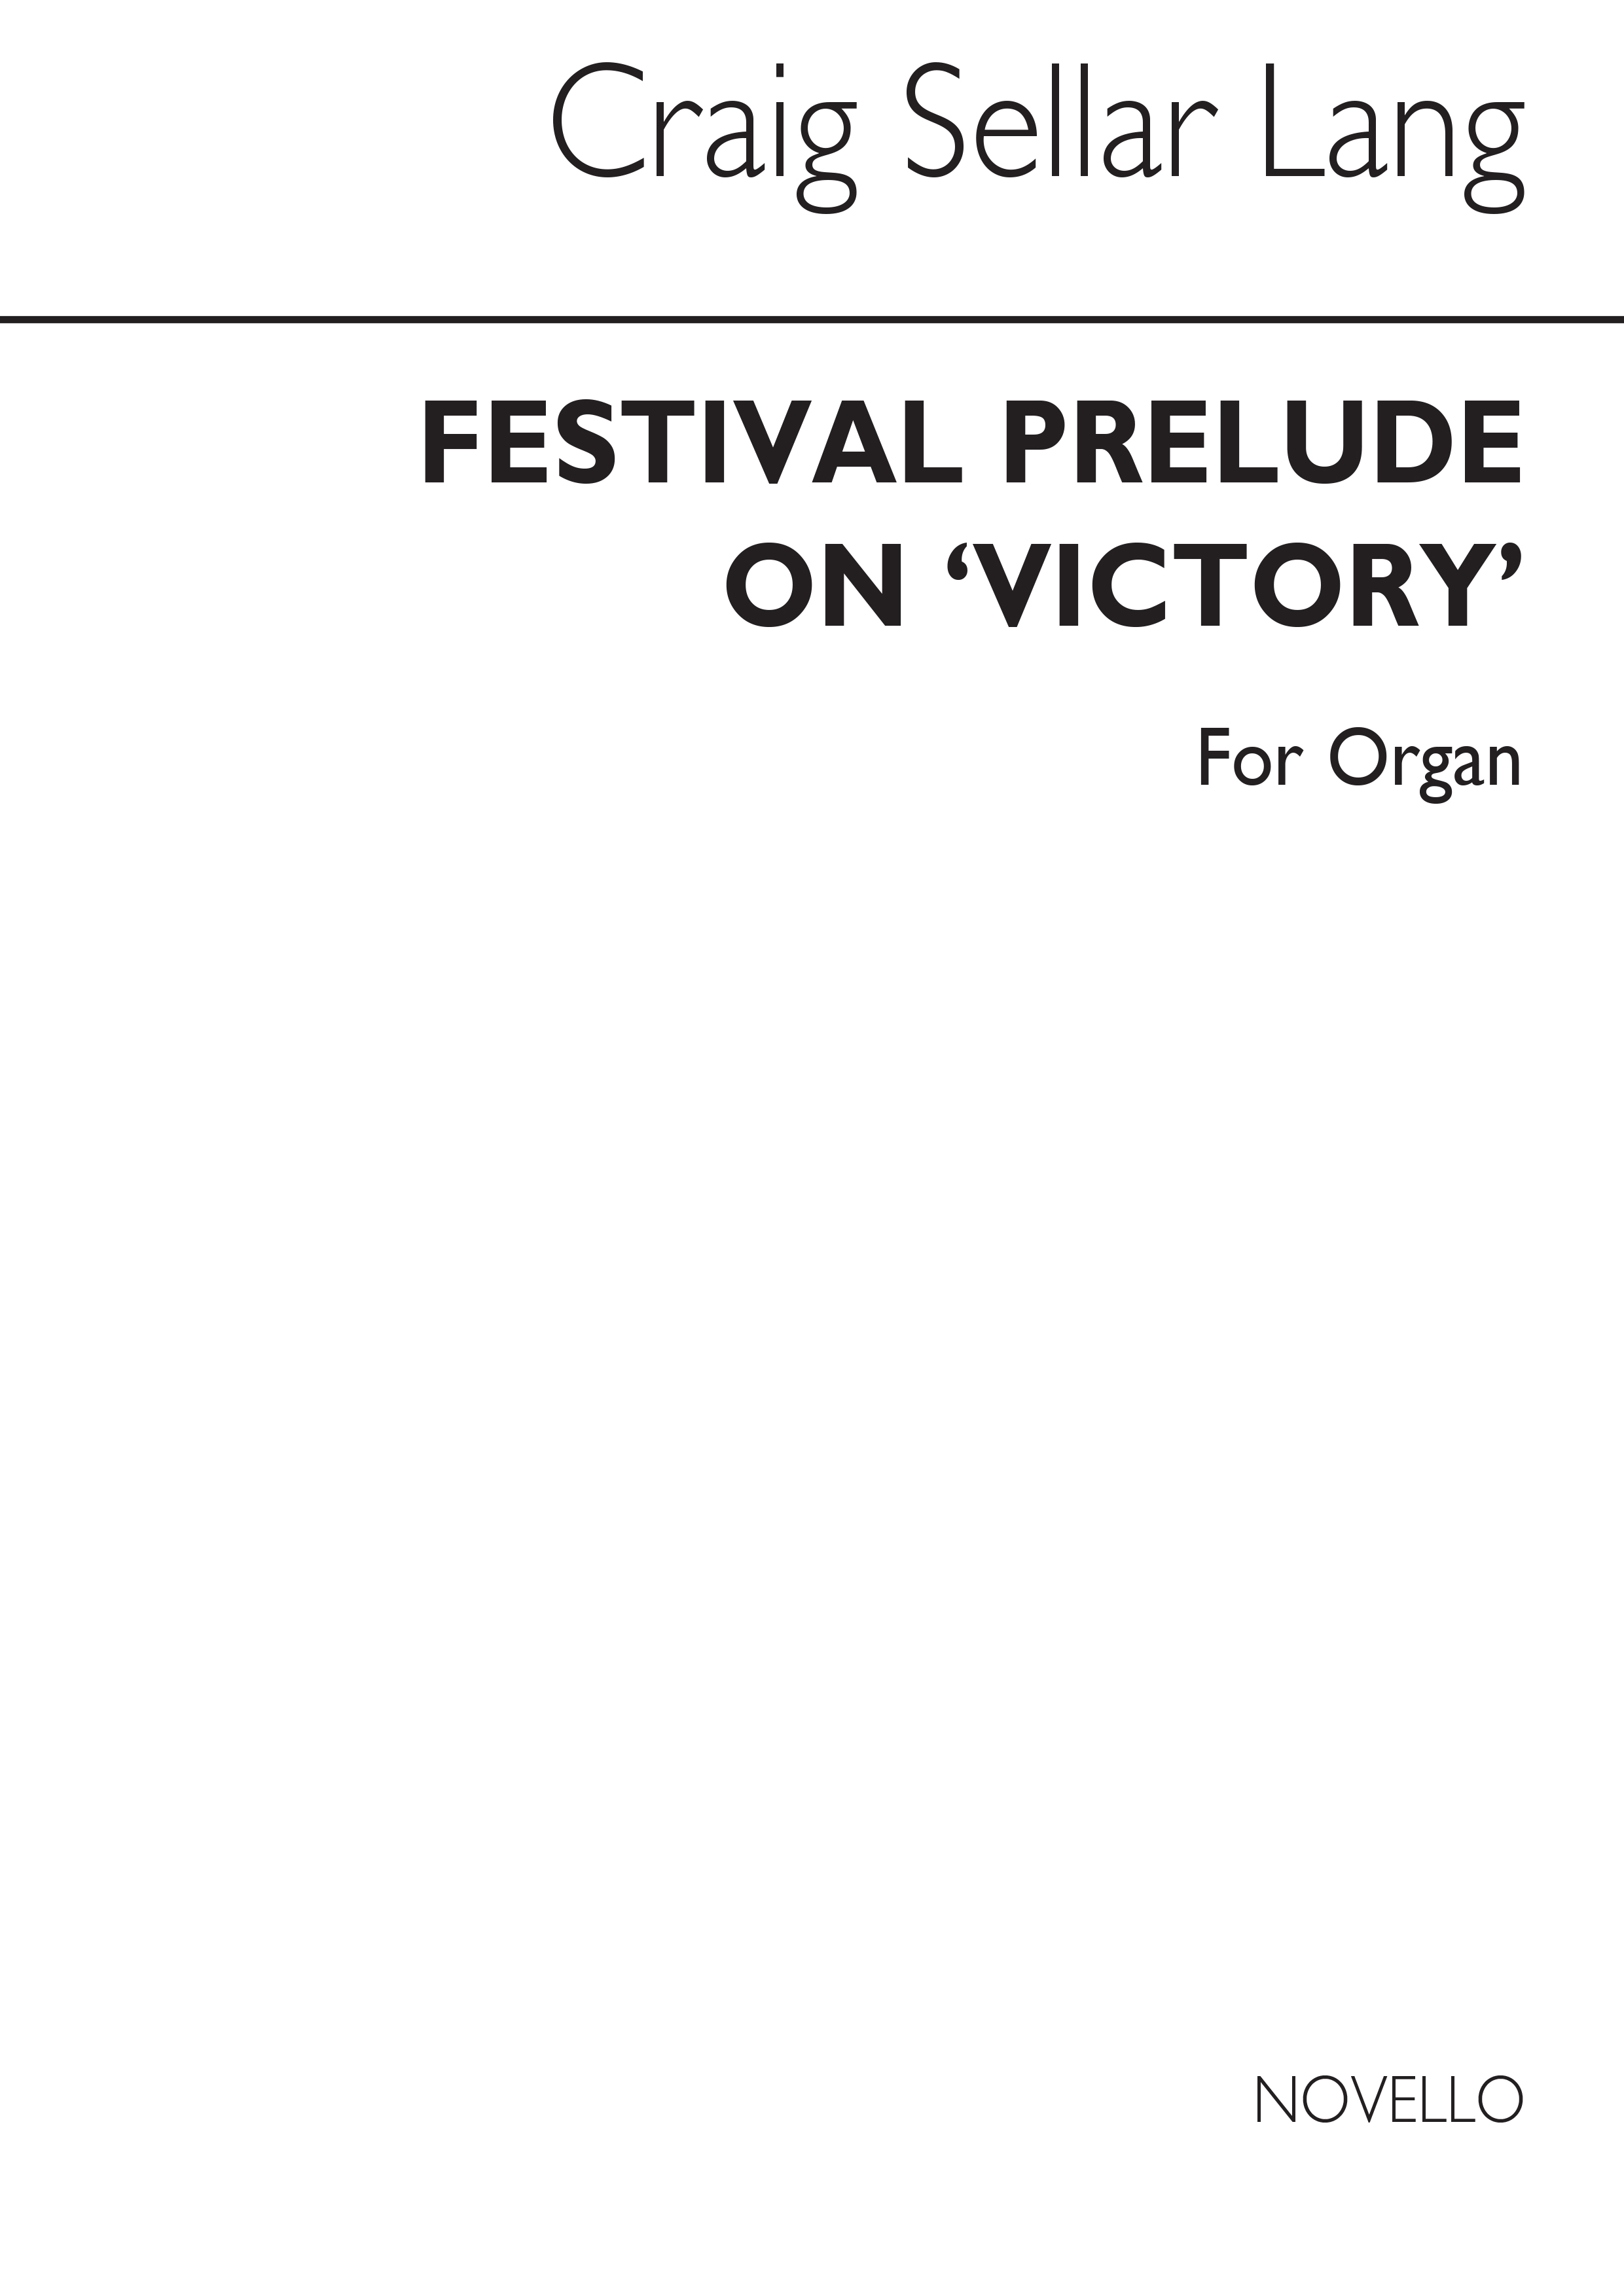 C.S. Lang: Festival Prelude On Victory for Organ